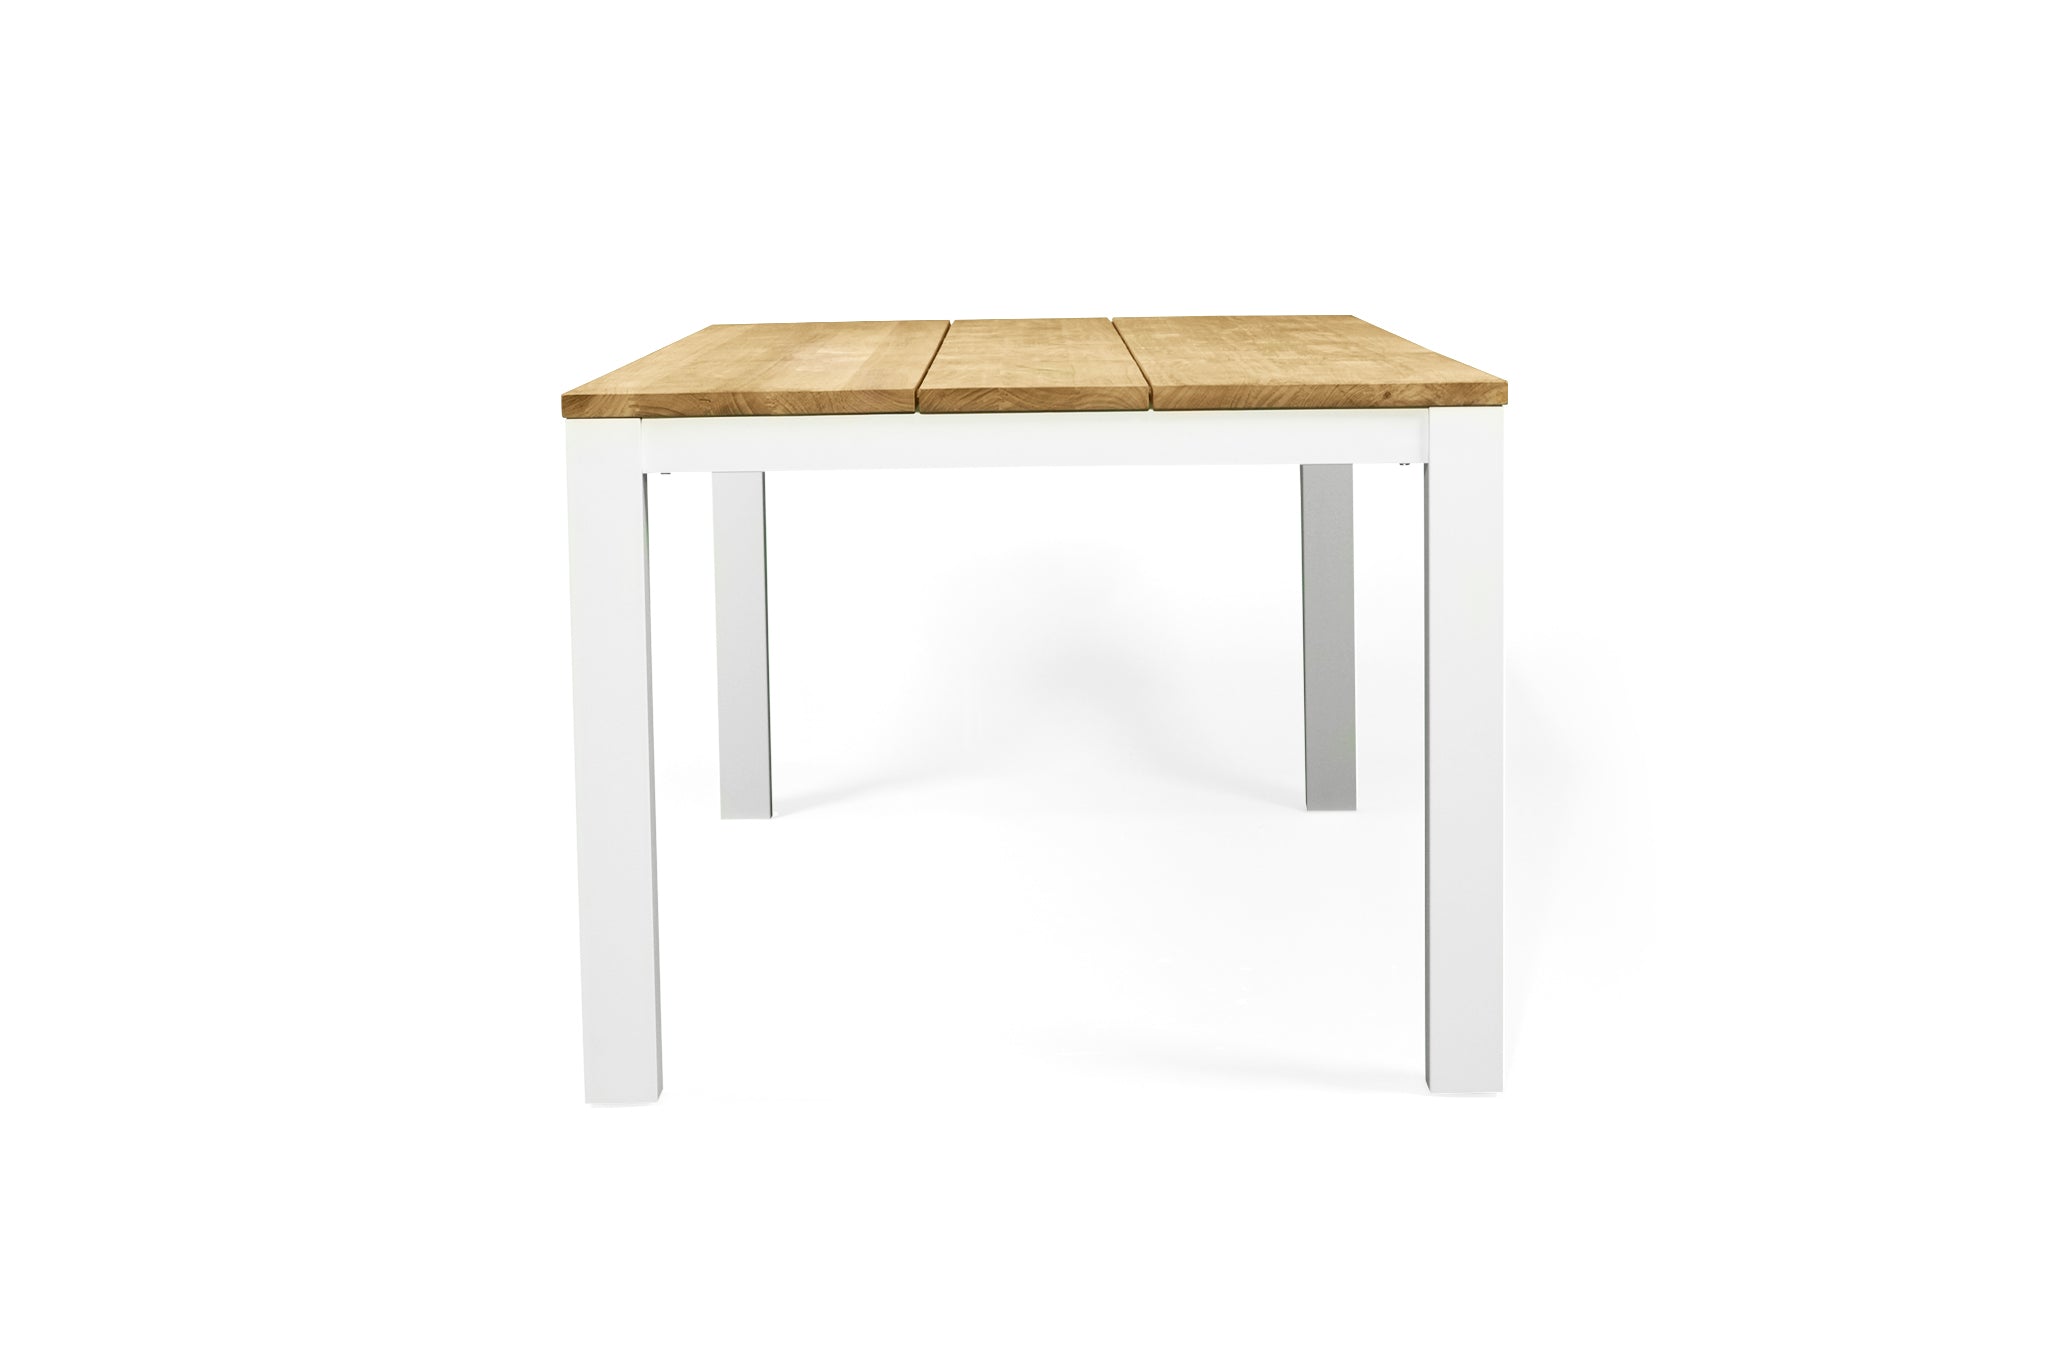 Rose Bay Outdoor Extension Table 3.1m – White Powder Coated Legs